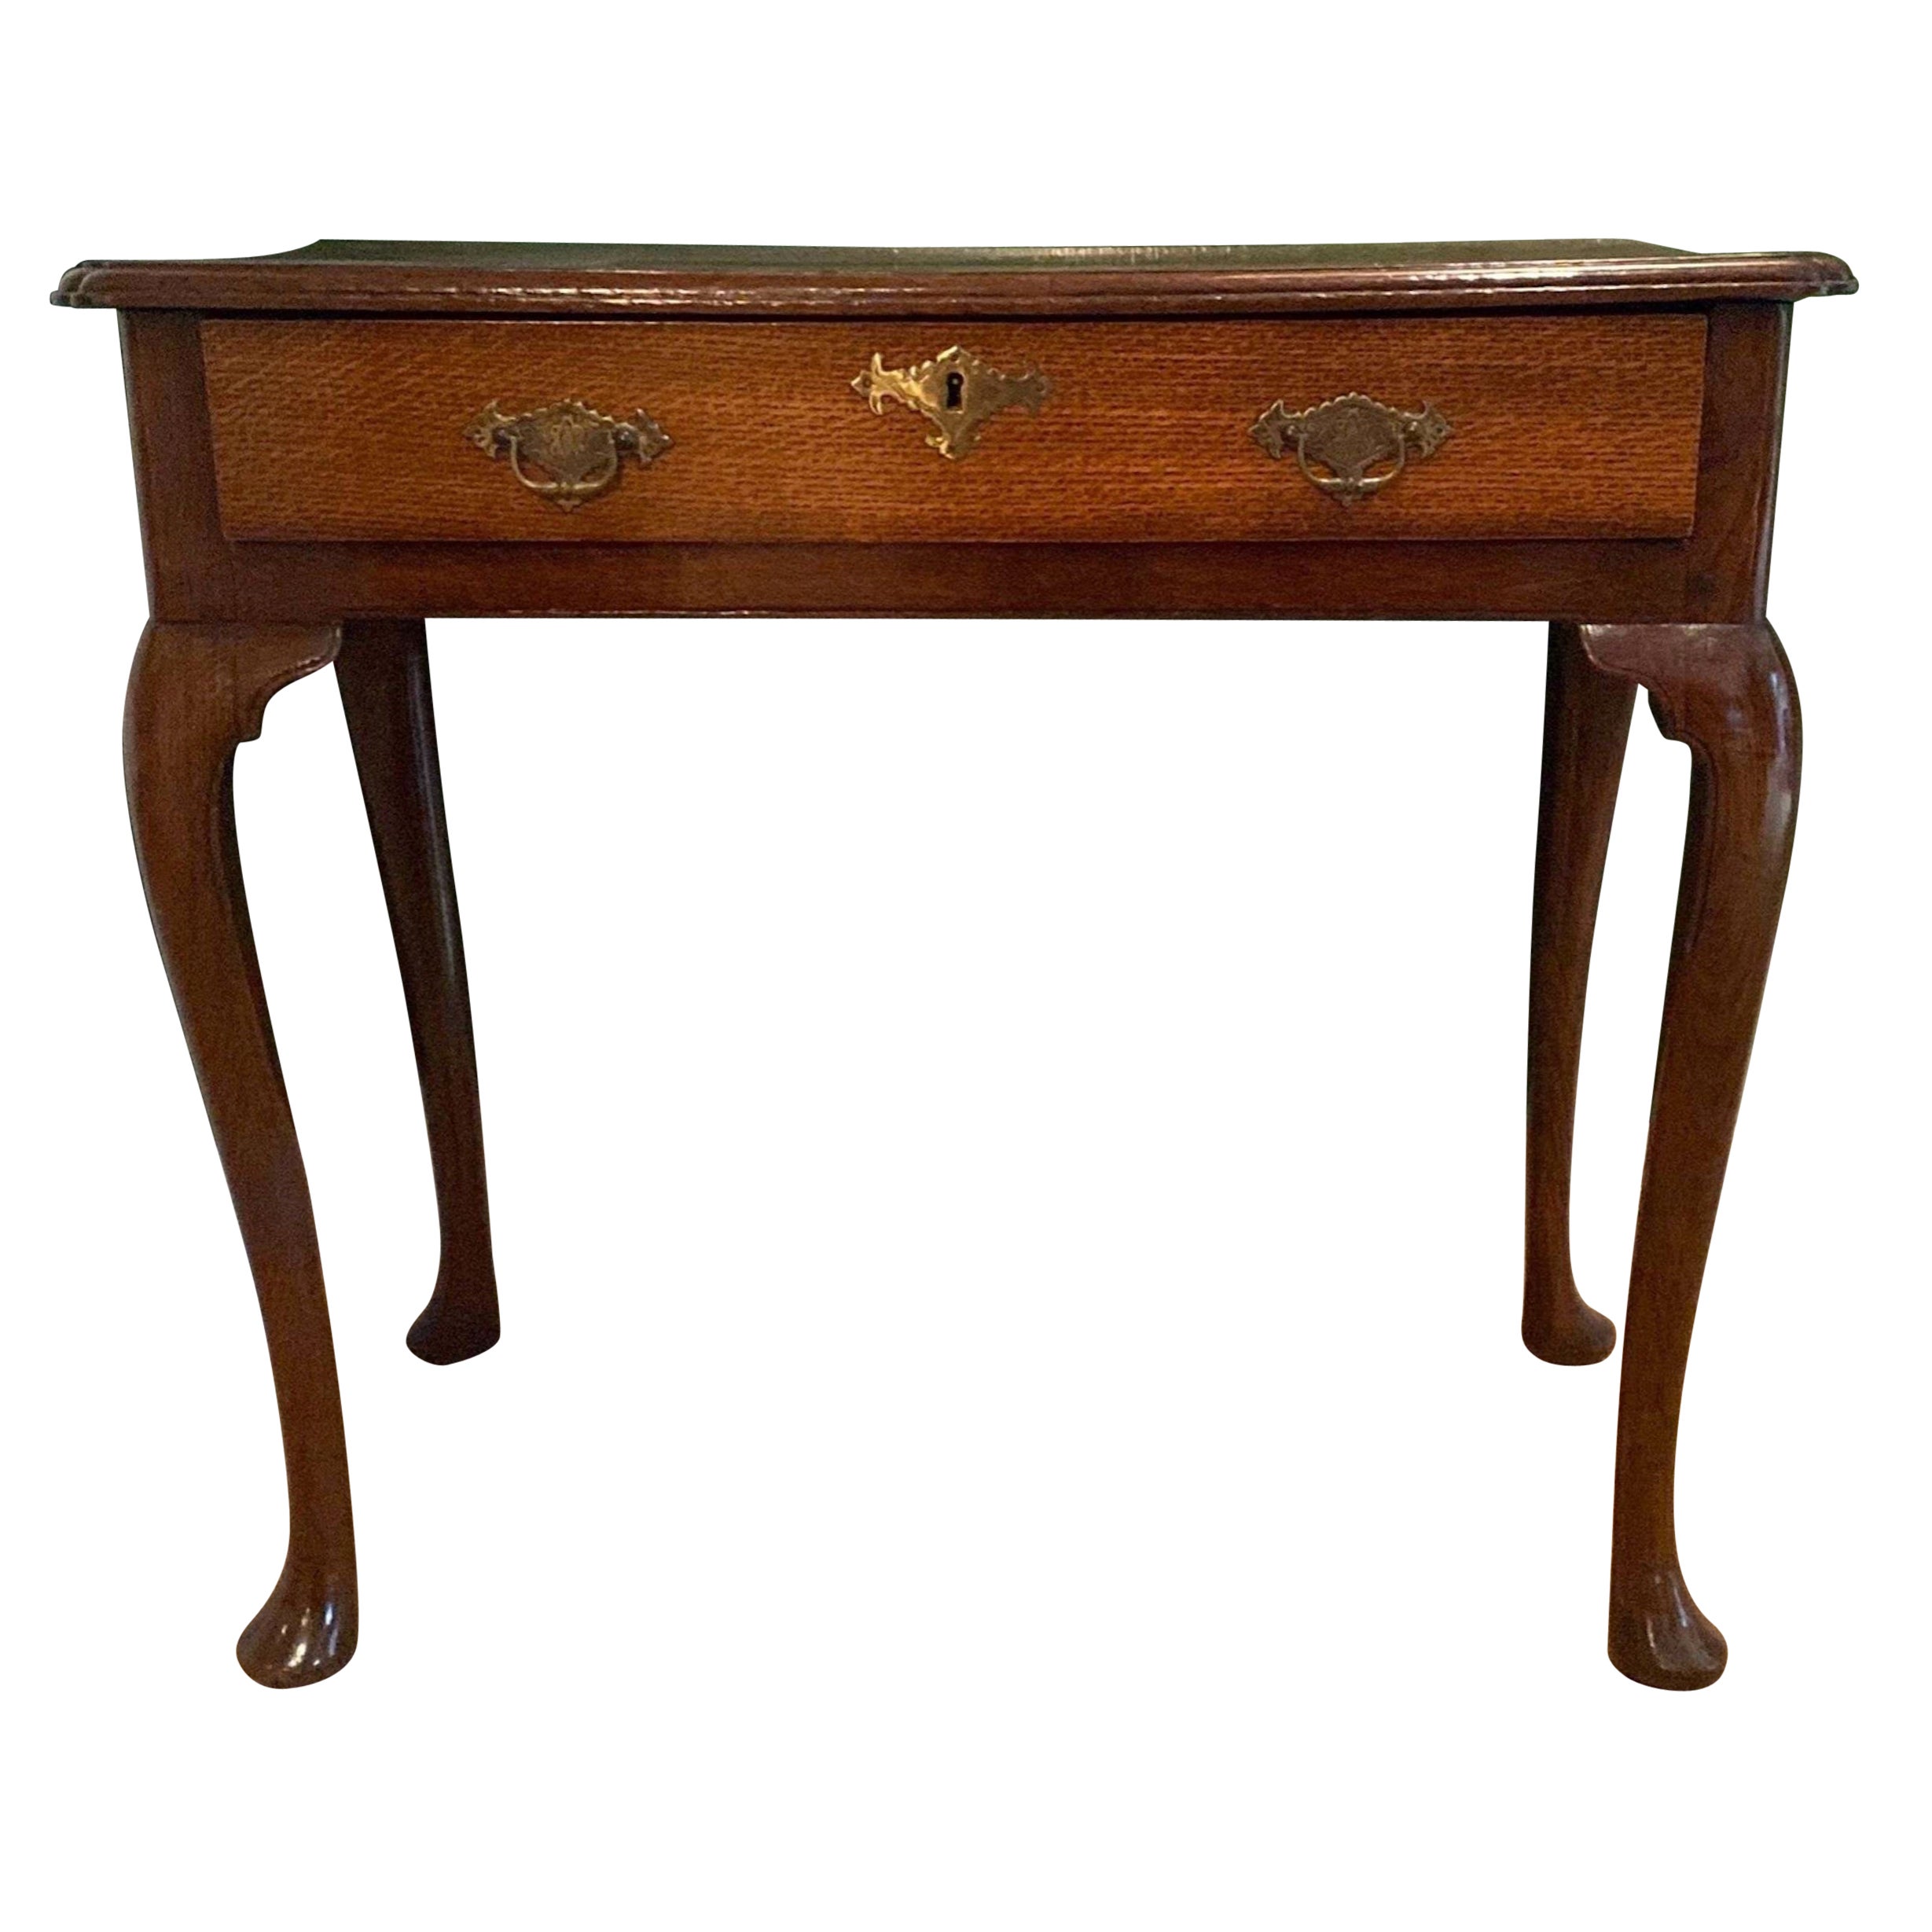 A George III side table in quarter sawn oak with a single drawer and pad feet. 